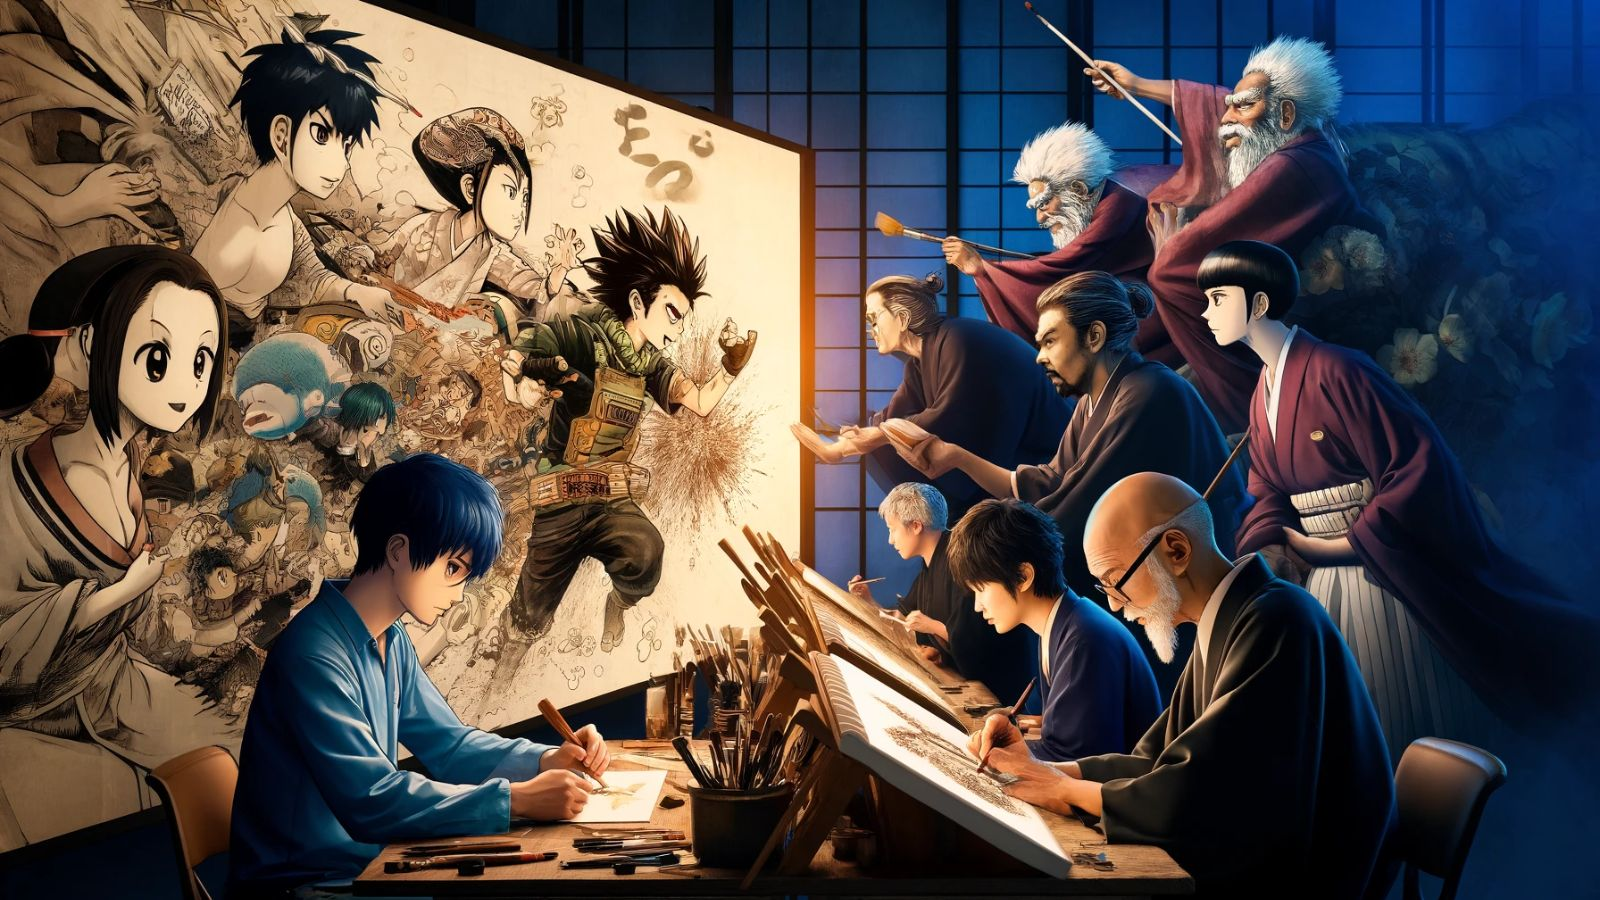 Anime drawings reflecting the Japanese culture